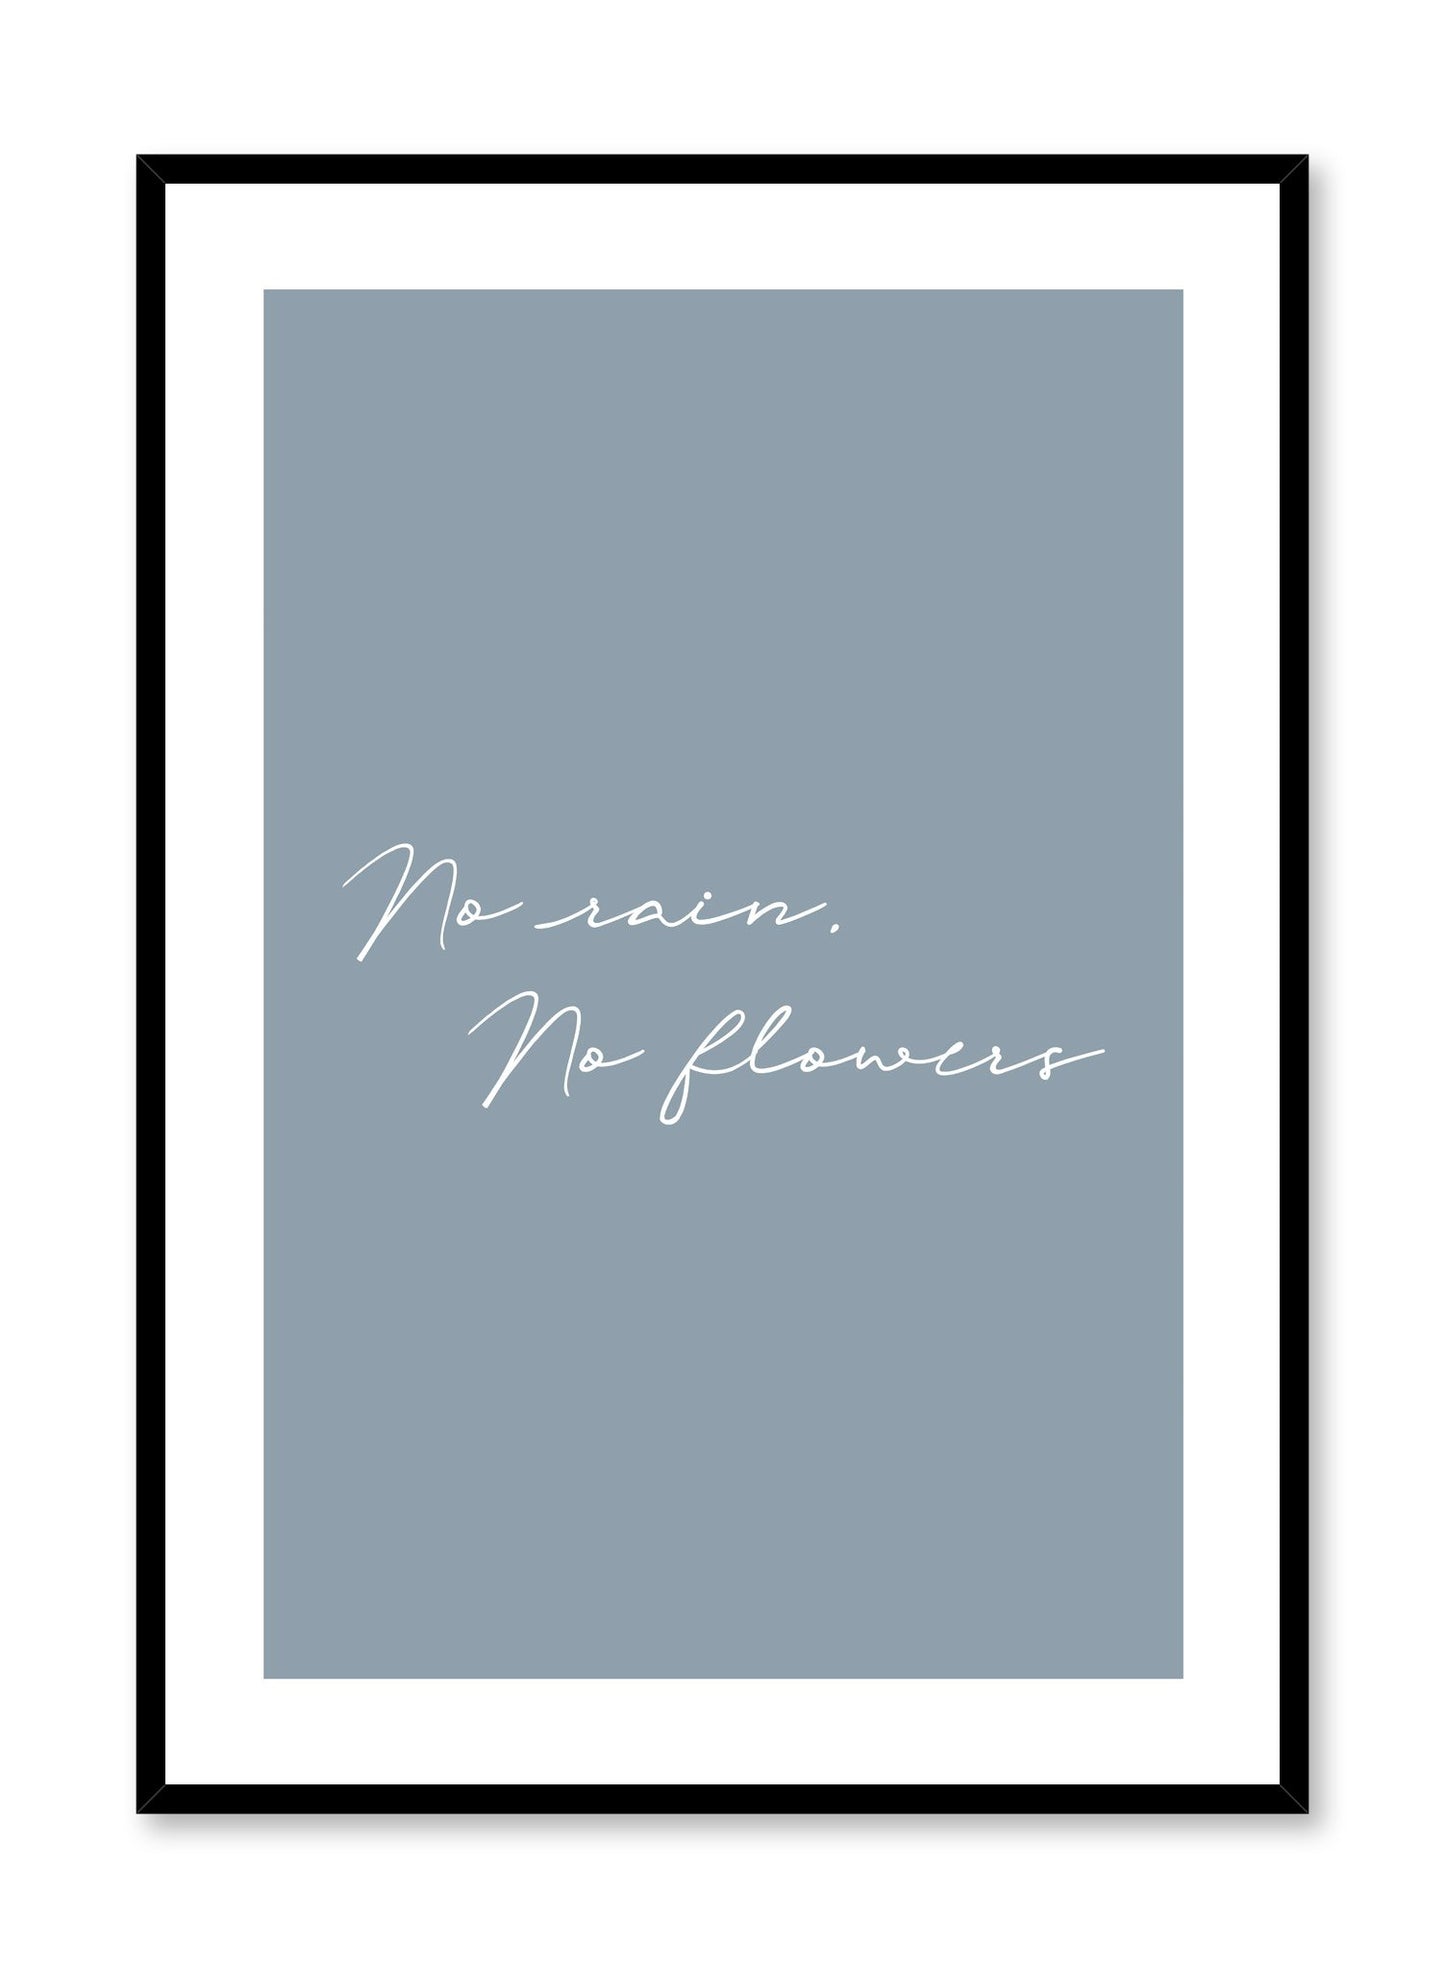 Modern minimalist typography poster by Opposite Wall with No Rain No Flowers quote in blue